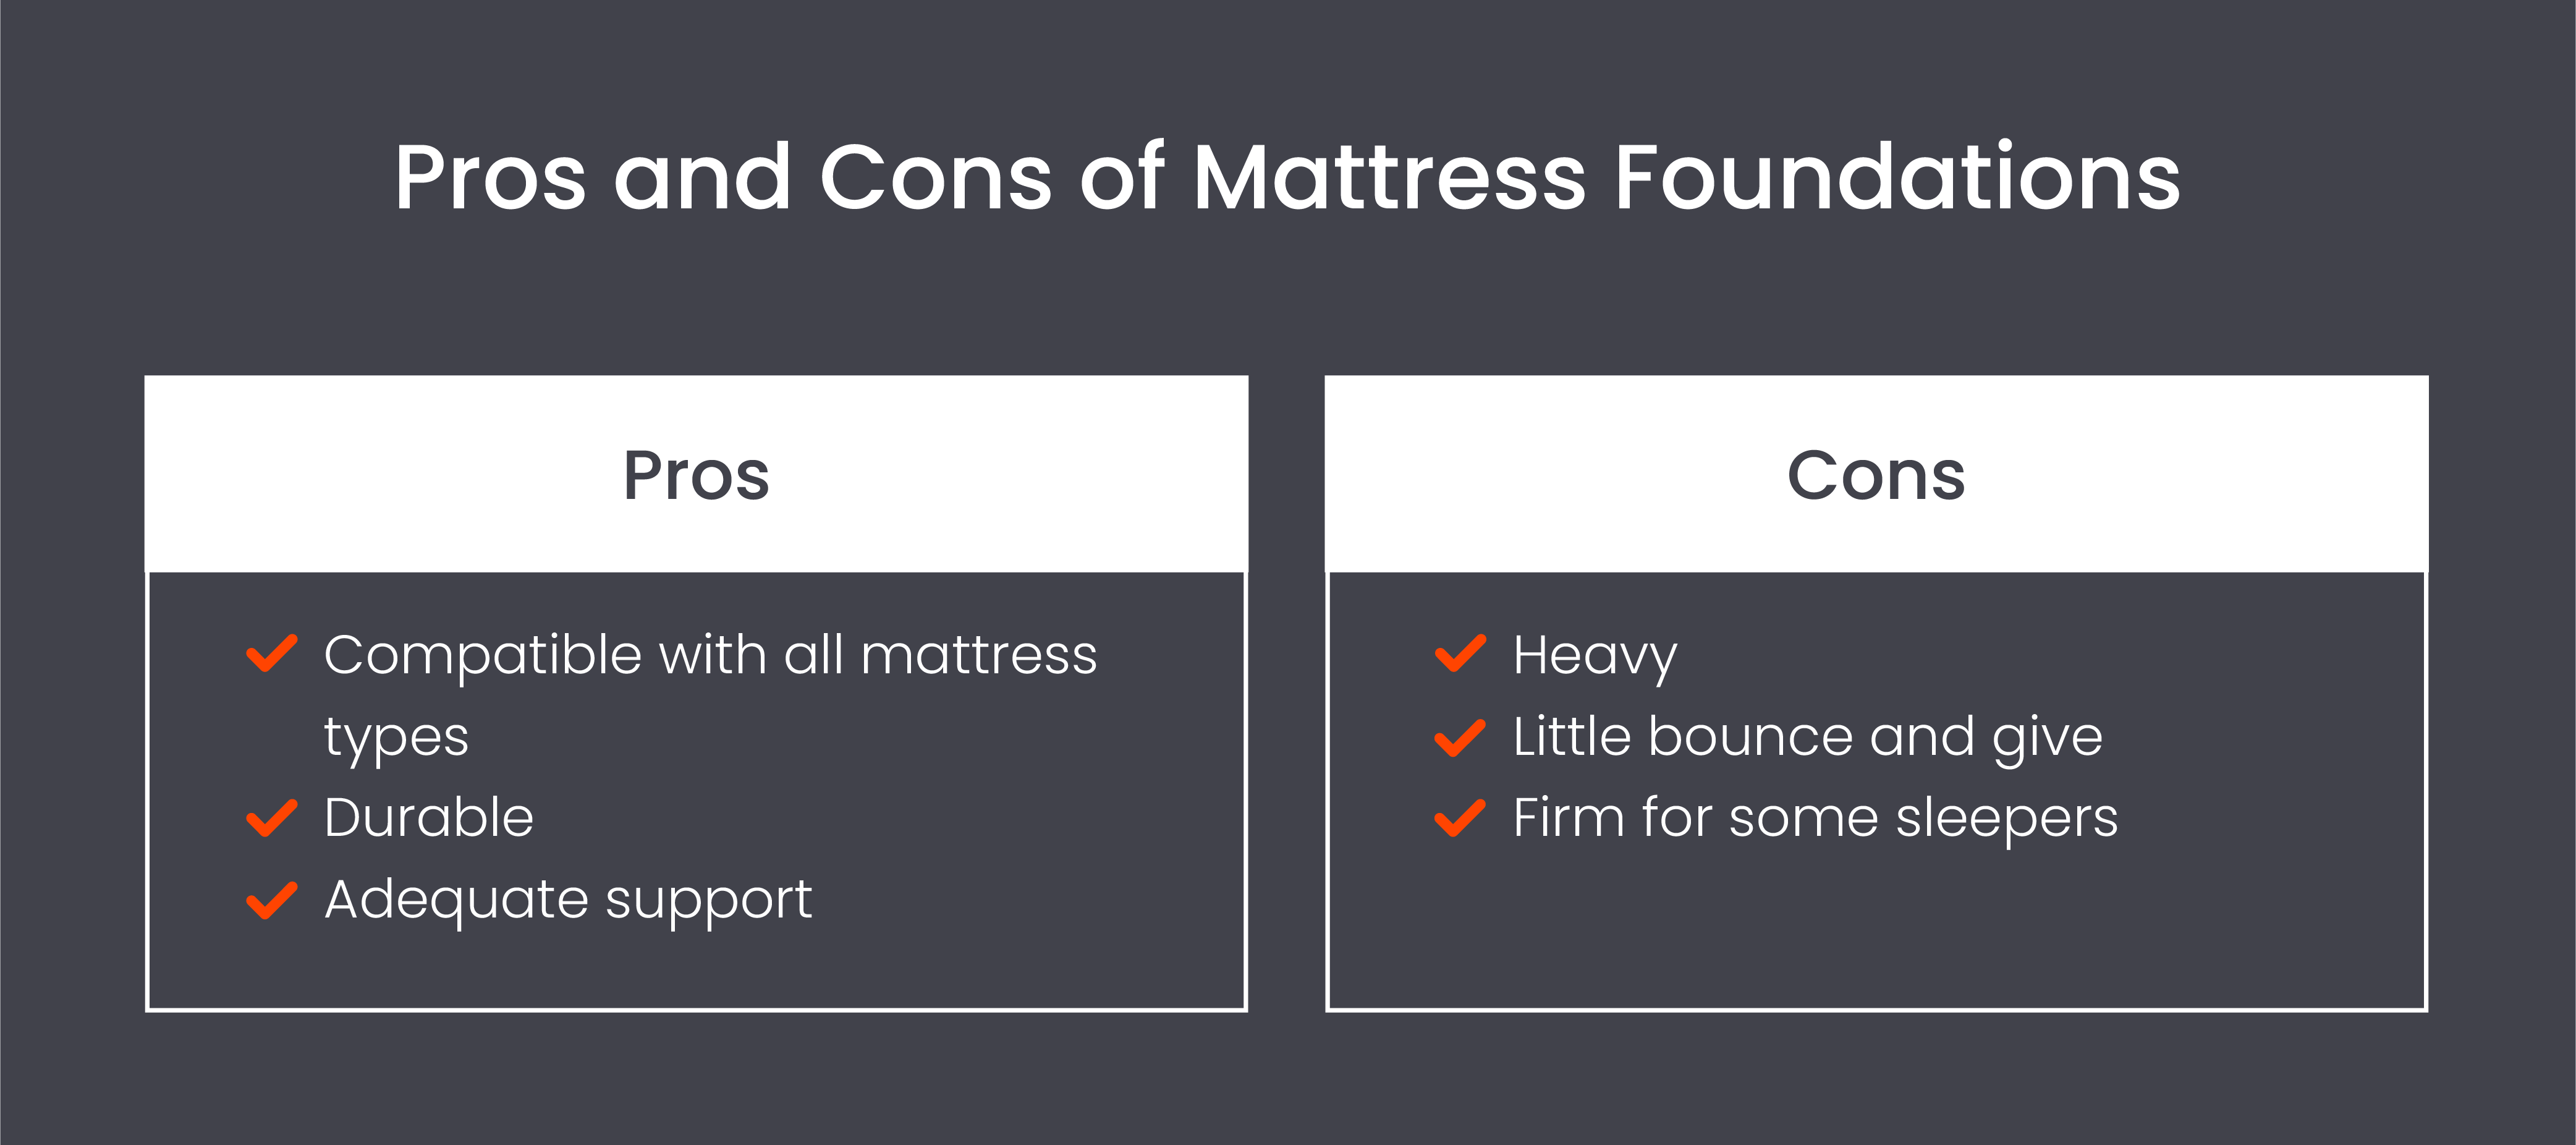 Pros and cons of mattress foundations